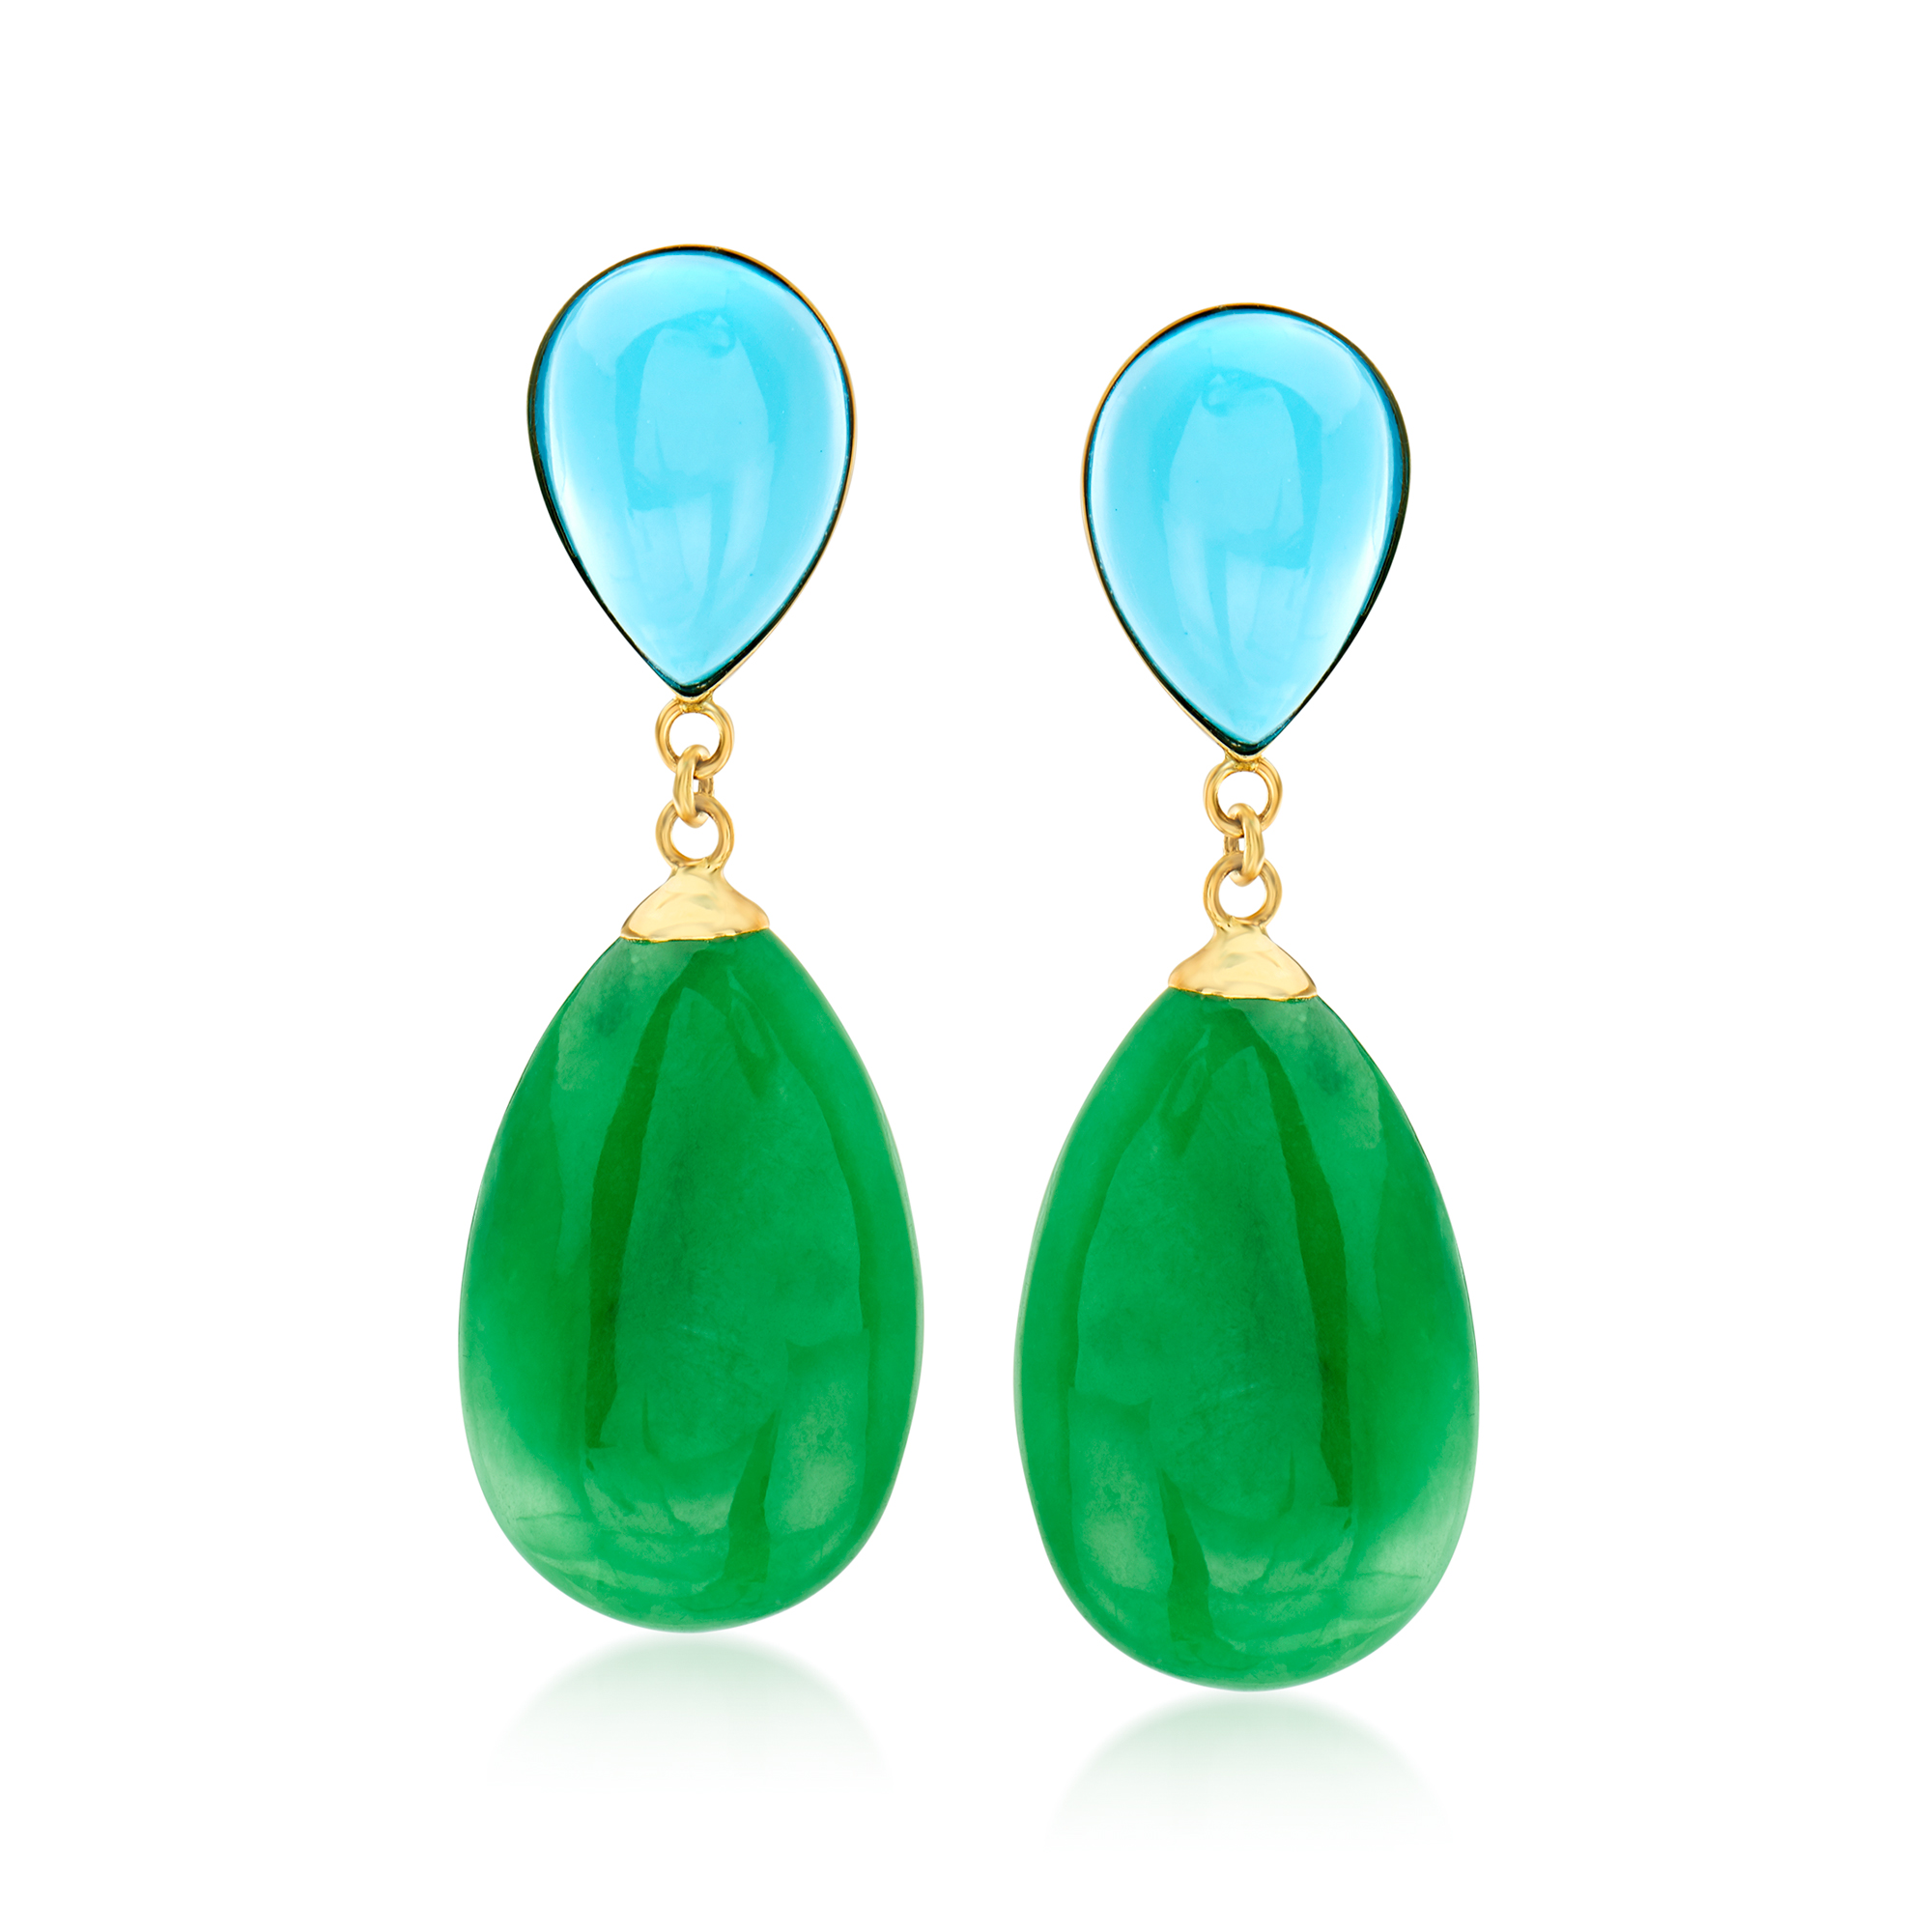 Jade and Simulated Turquoise Teardrop Earrings in 14kt Yellow Gold 